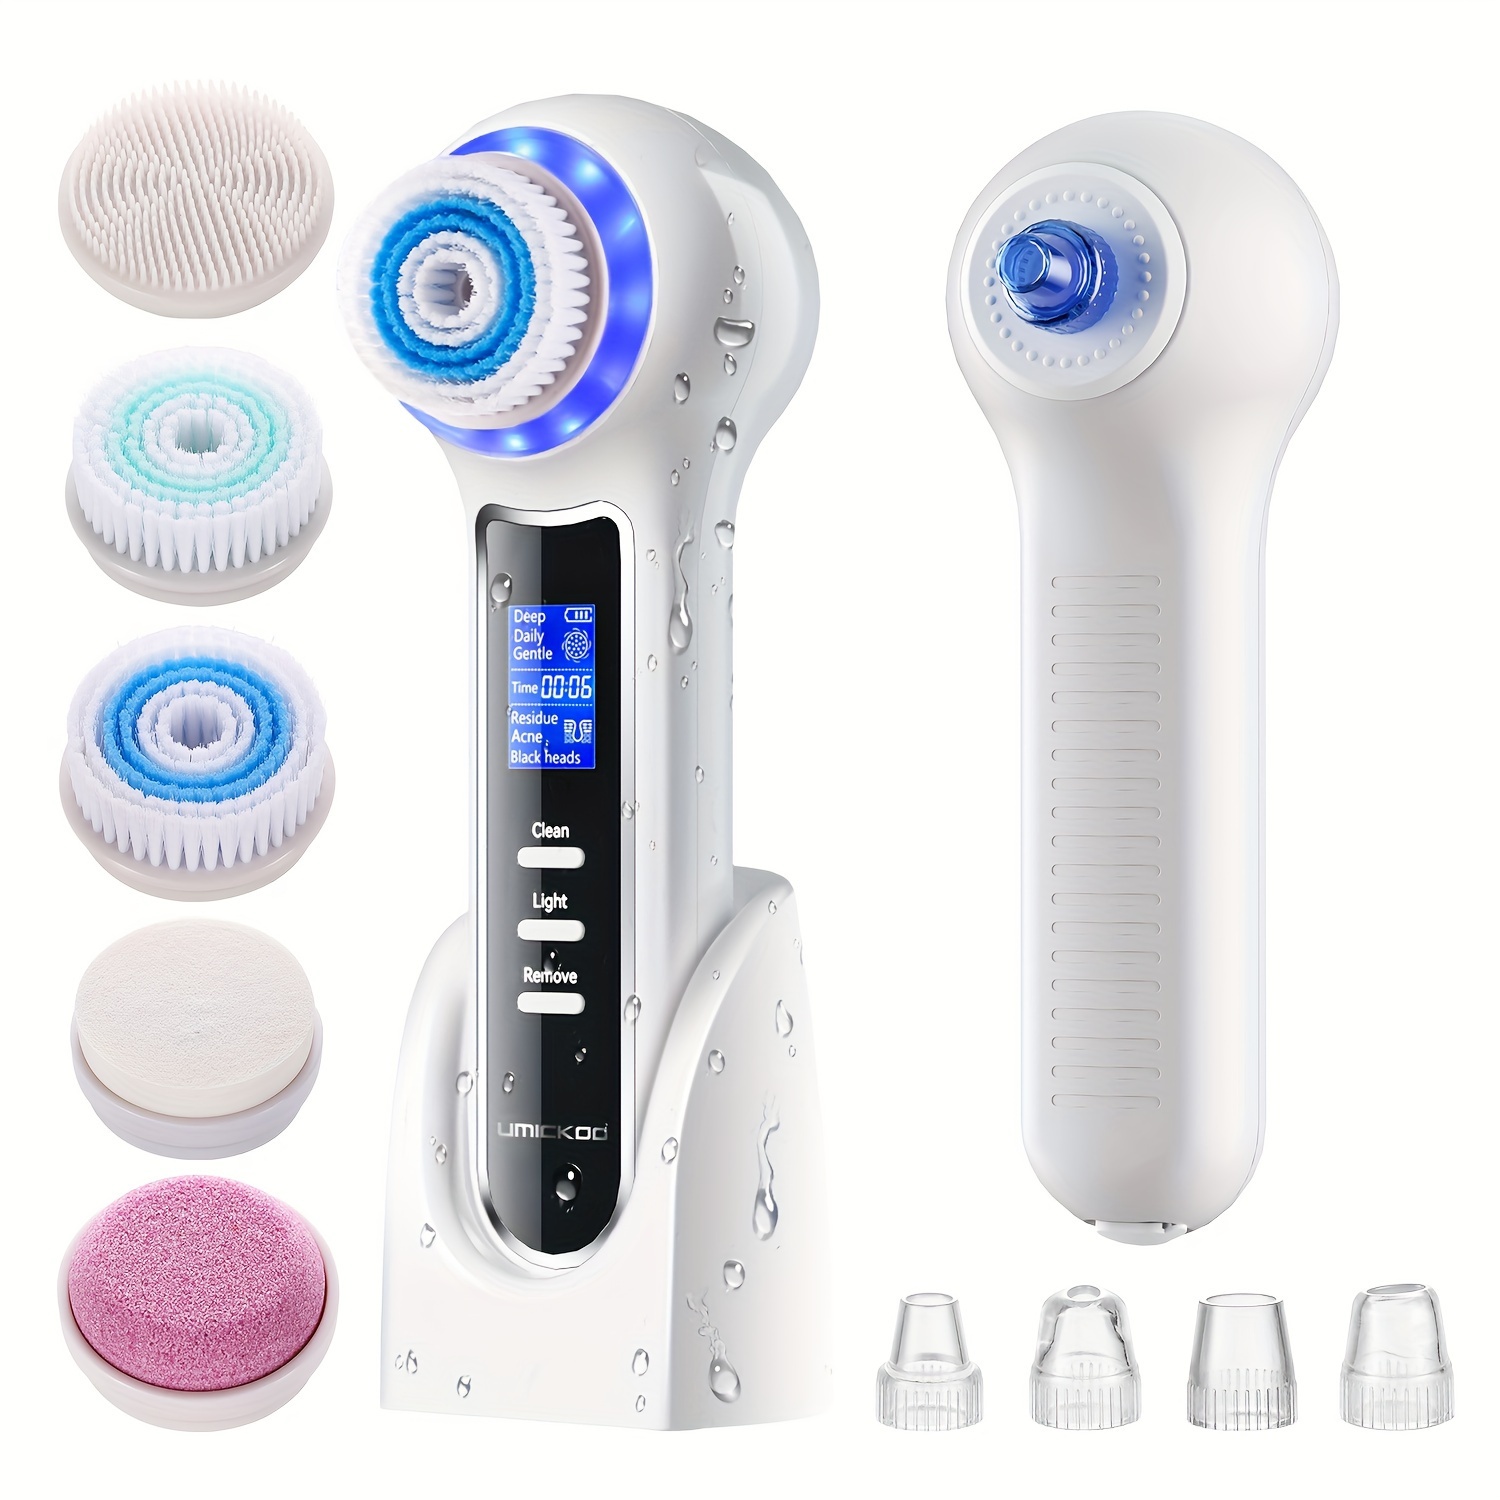 

Scrubber Exfoliator With Lcd Screen Rechargeable Facial Cleansing Brush Ipx7 Waterproof 3 In 1 Remover Vacuum For Exfoliating Deep Pore Cleansing